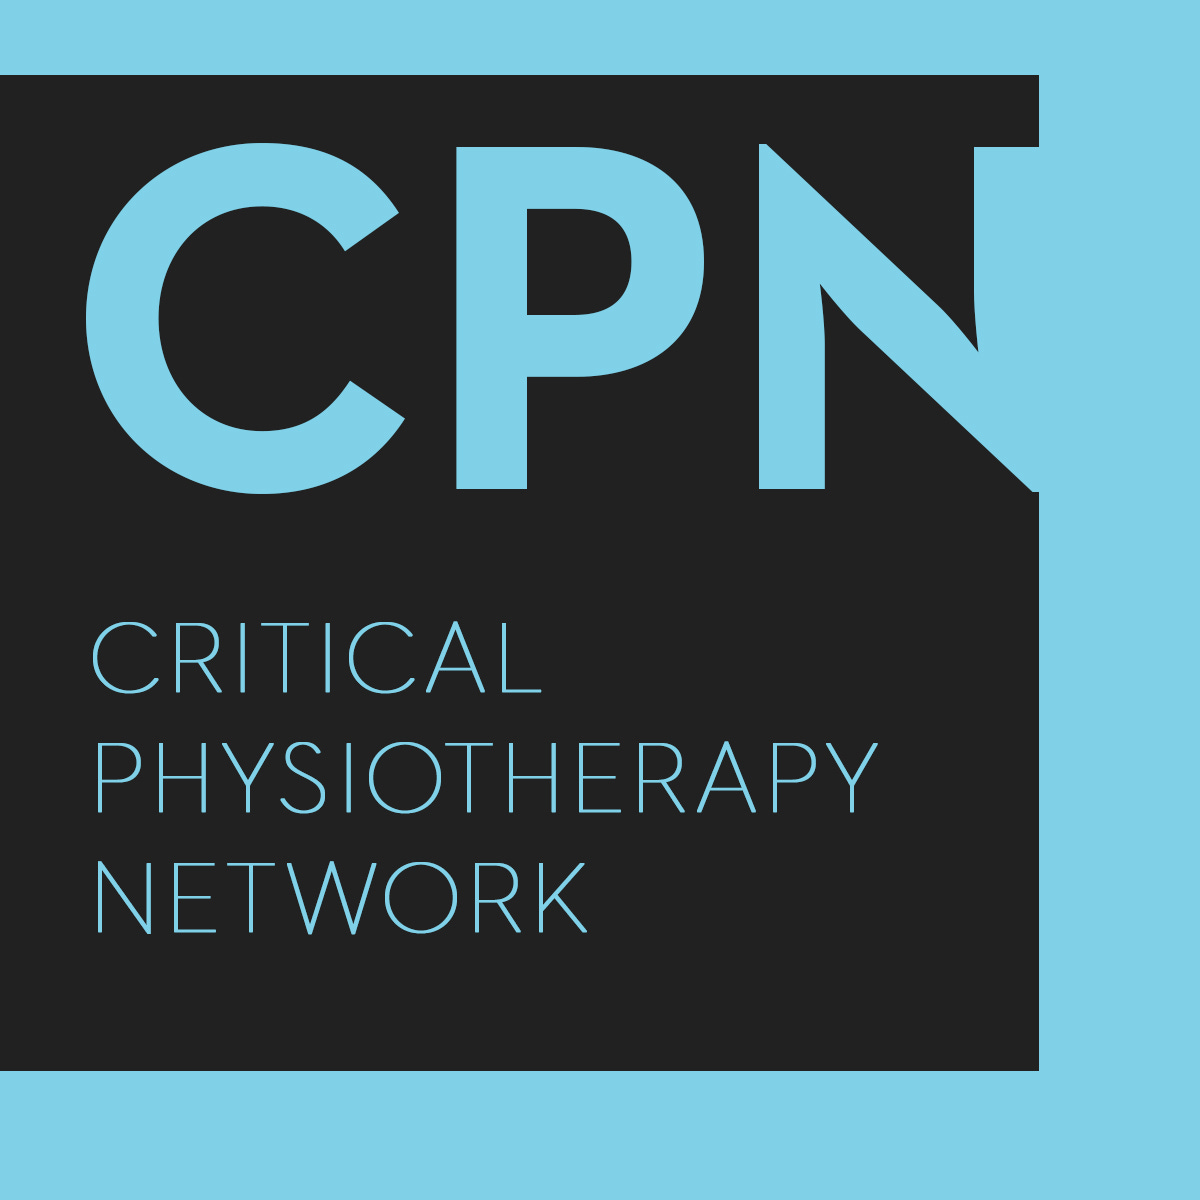 Artwork for The Critical Physiotherapy Network Herald